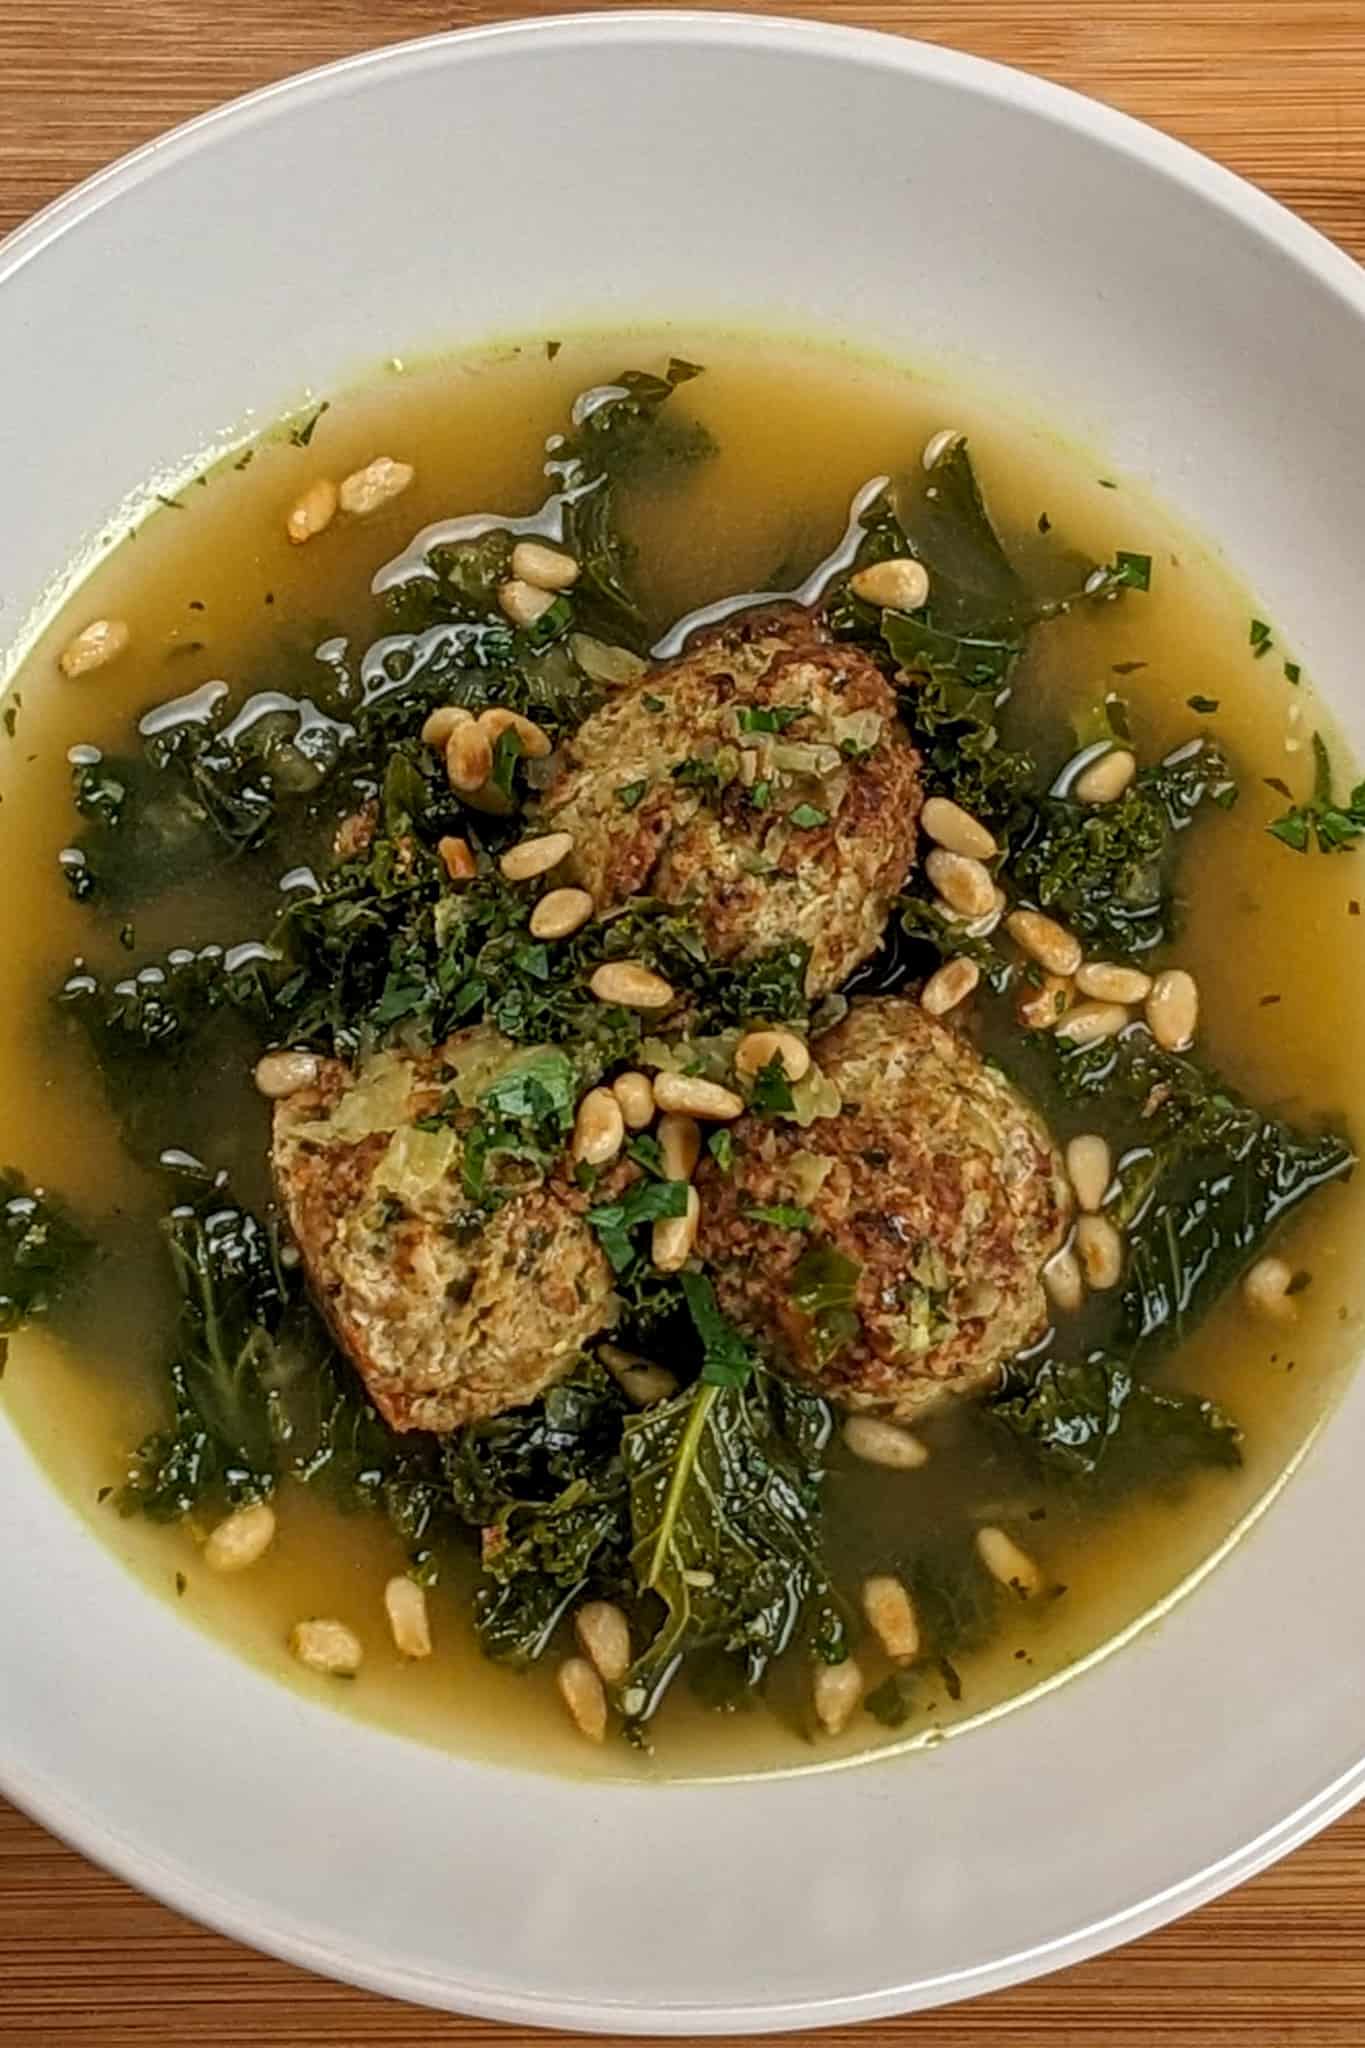 top close up view of the Easy and Healthy Spicy Turkey Meatball Kale Soup in a wide rim bowl garnished with toasted pine nuts